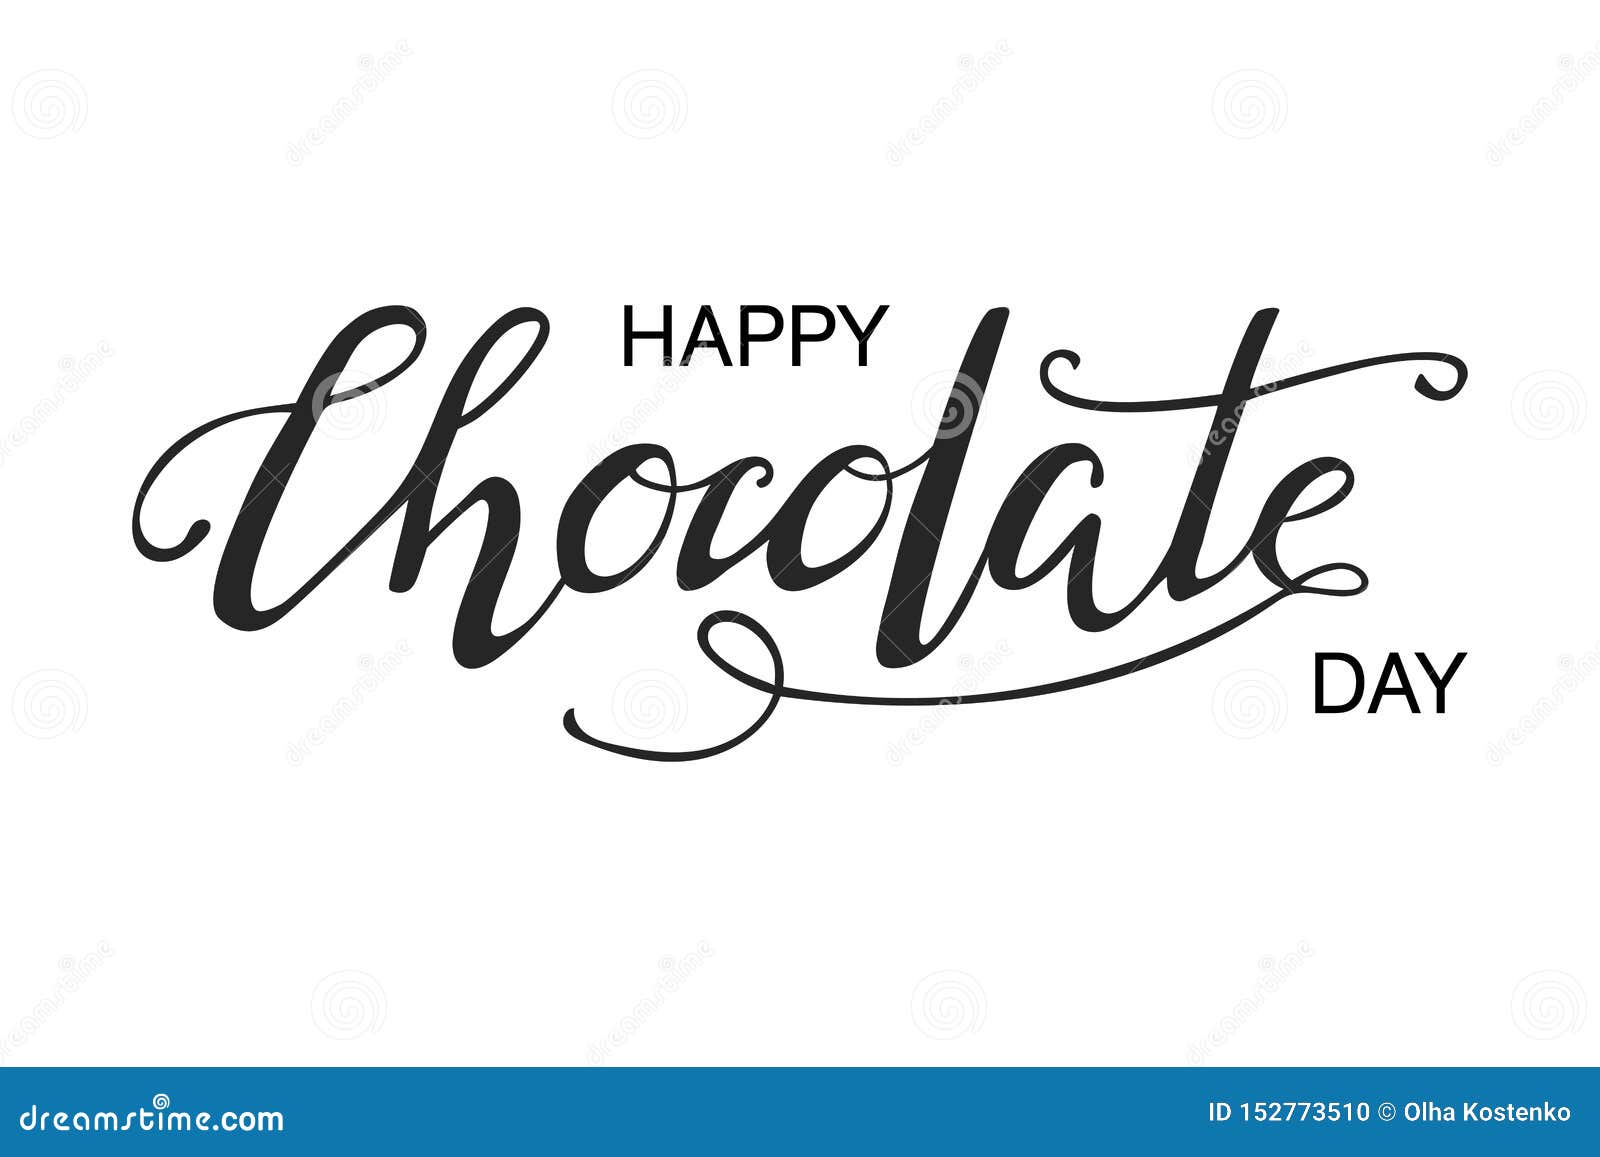 Hand Drawn Happy Chocolate Day Stock Vector - Illustration of font ...